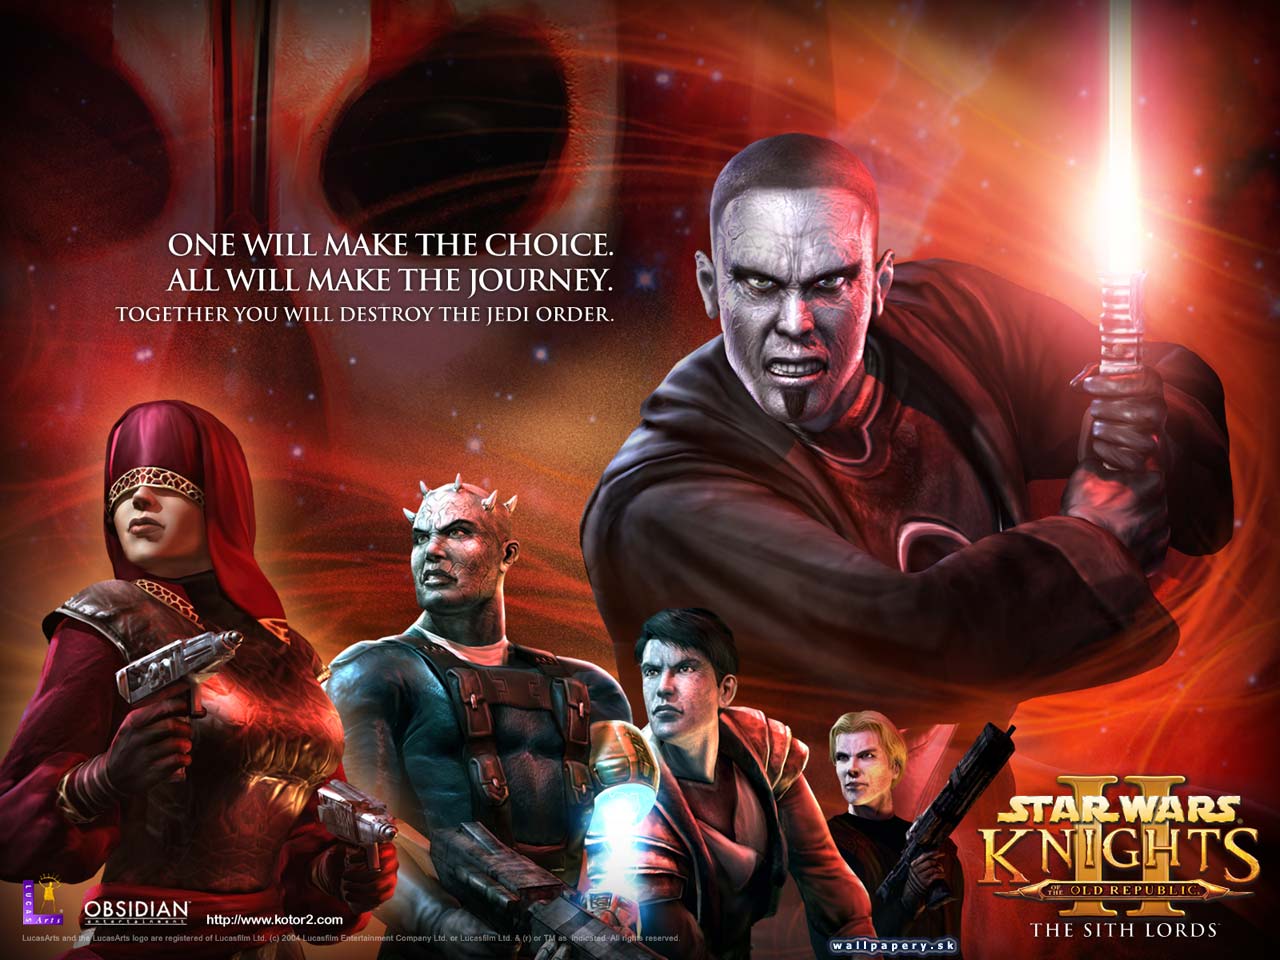 Star Wars: Knights of the Old Republic 2: The Sith Lords - wallpaper 5